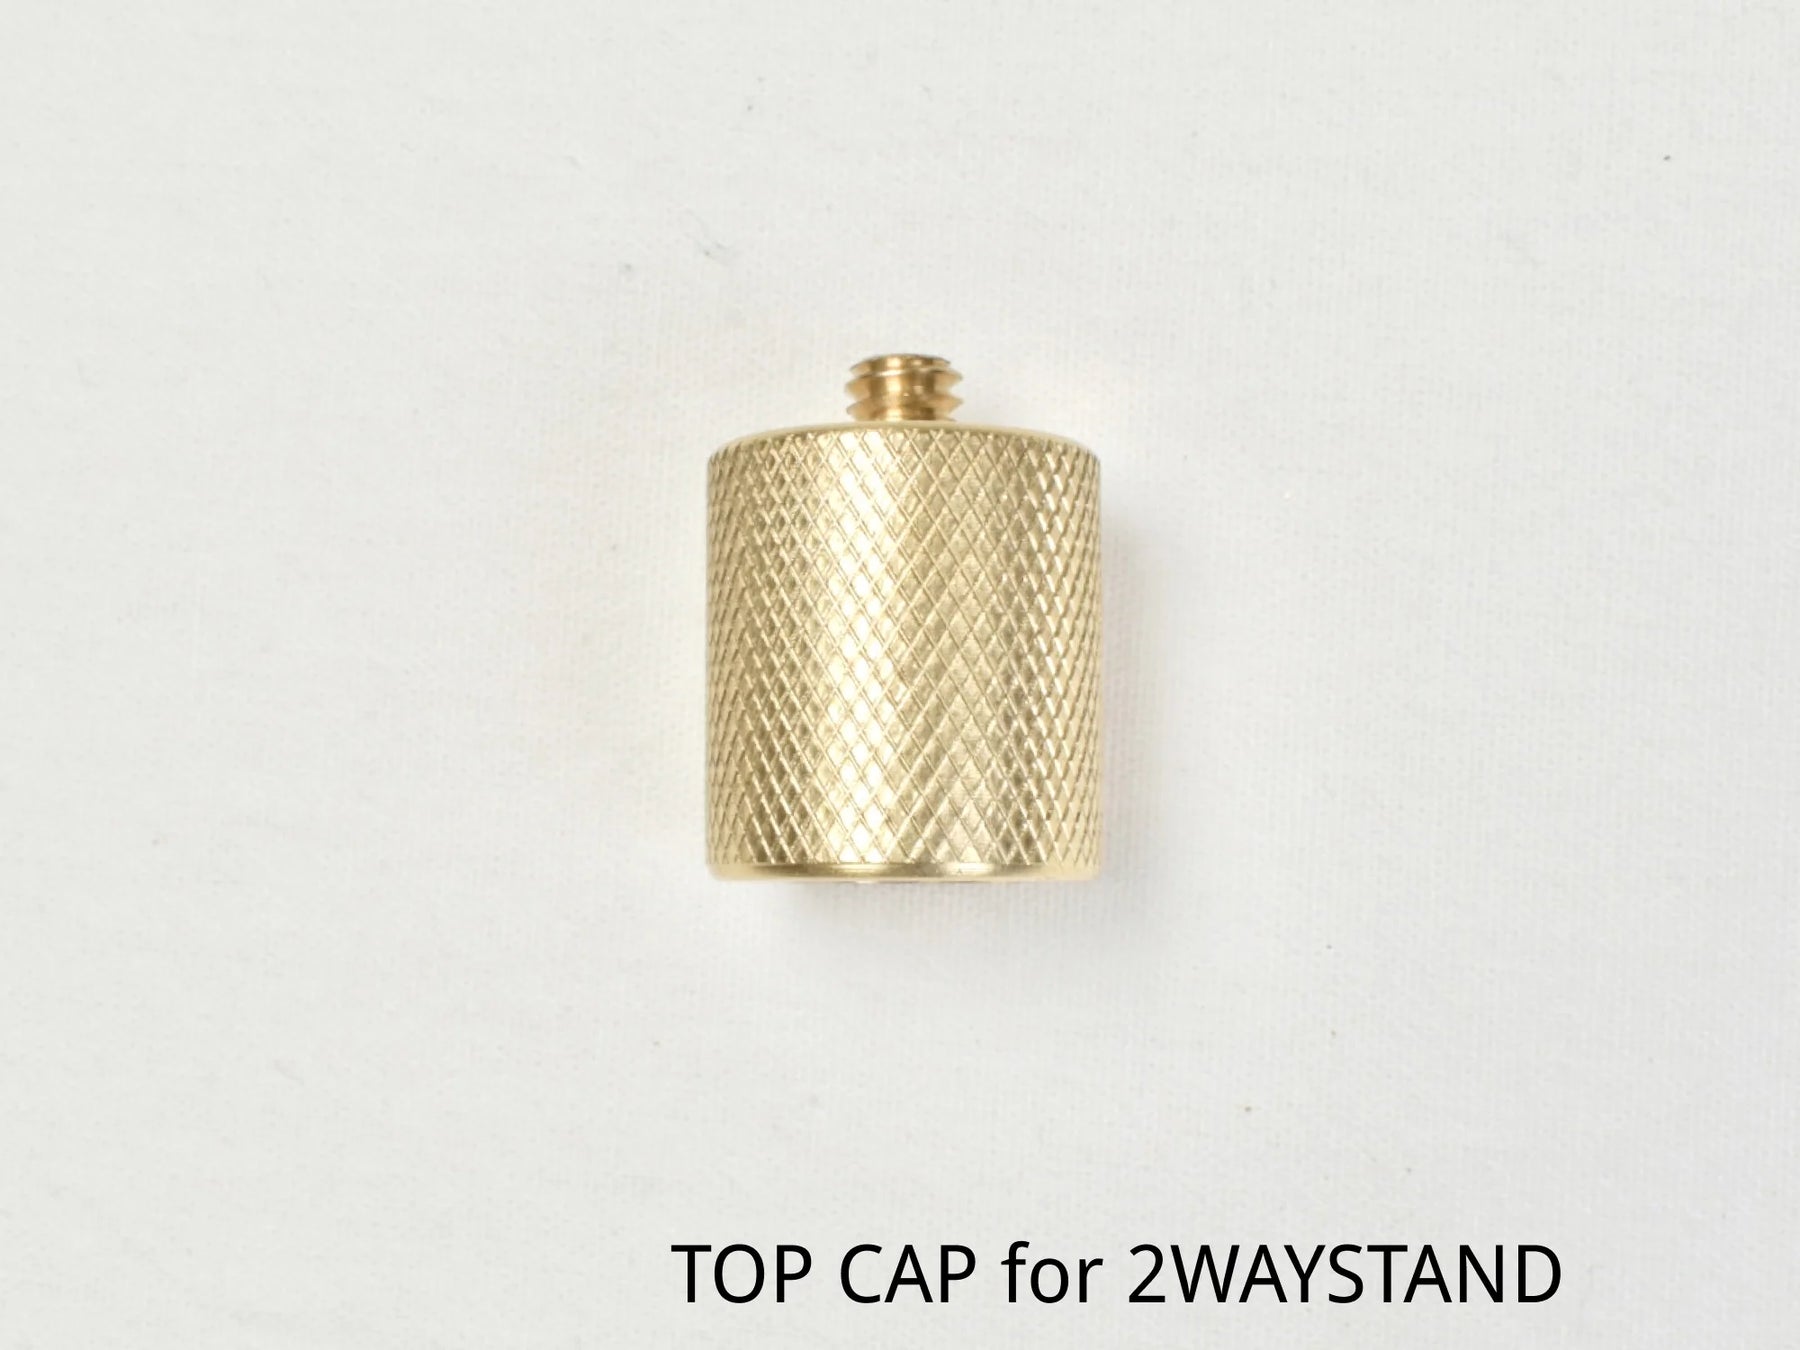 TOP CAP for 2WAY STAND